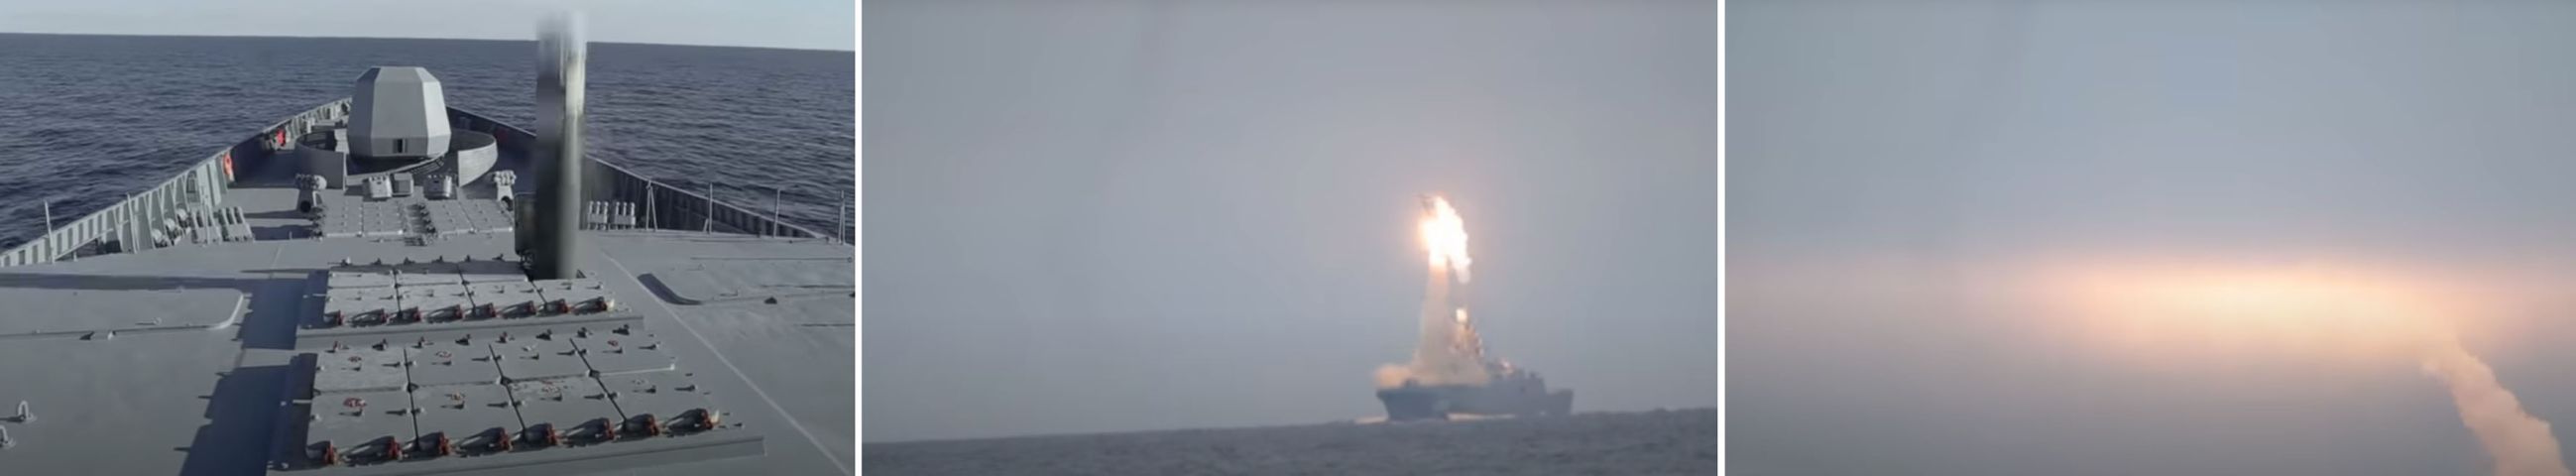 
        Russian Ministry of Defence footage, originally released on 7 October 2020 and widely recirculated online, shows the missile sequence of the reported test of a 3M-22 Tsirkon hypersonic anti-ship missile by the Project 22350 
        Admiral Gorshkov
        -class guided missile frigate (FFGHM). At launch from the vertical launch system (VLS), the weather is good with only high and thin cloud cover, but the next sequence shows thick cloud into which the missile disappears. Such anomalies call the whole video into question.
       (Source withheld)